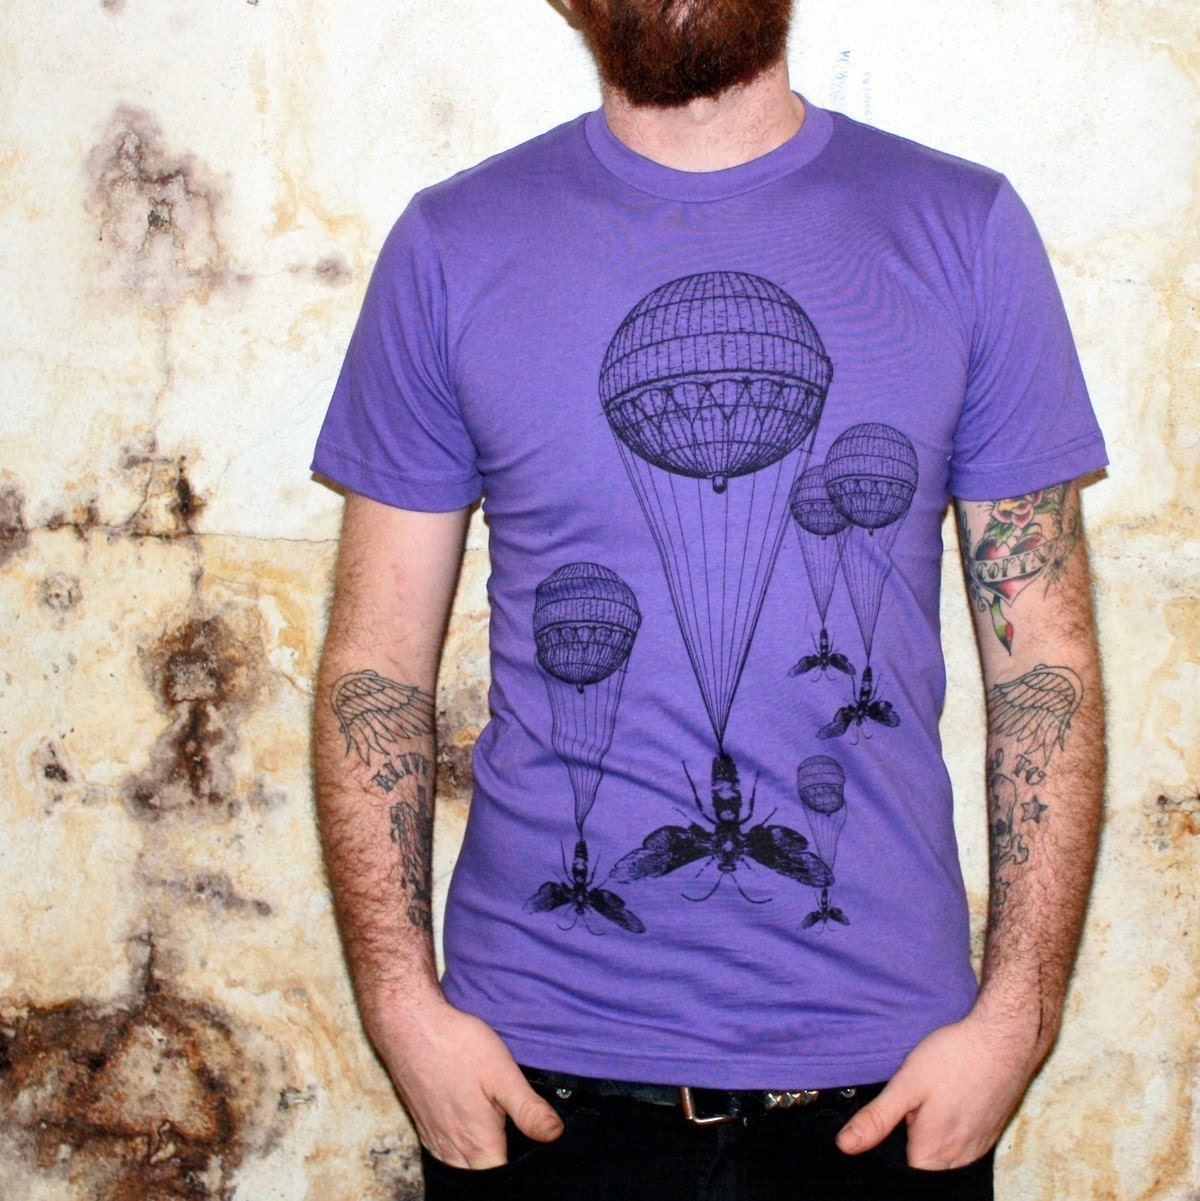 Steampunk Hot Air Balloon Insect Purple T-Shirt - American Apparel Amethyst - Complimentary Shipping - Available in XS, S, M, L, Xl and Xxl